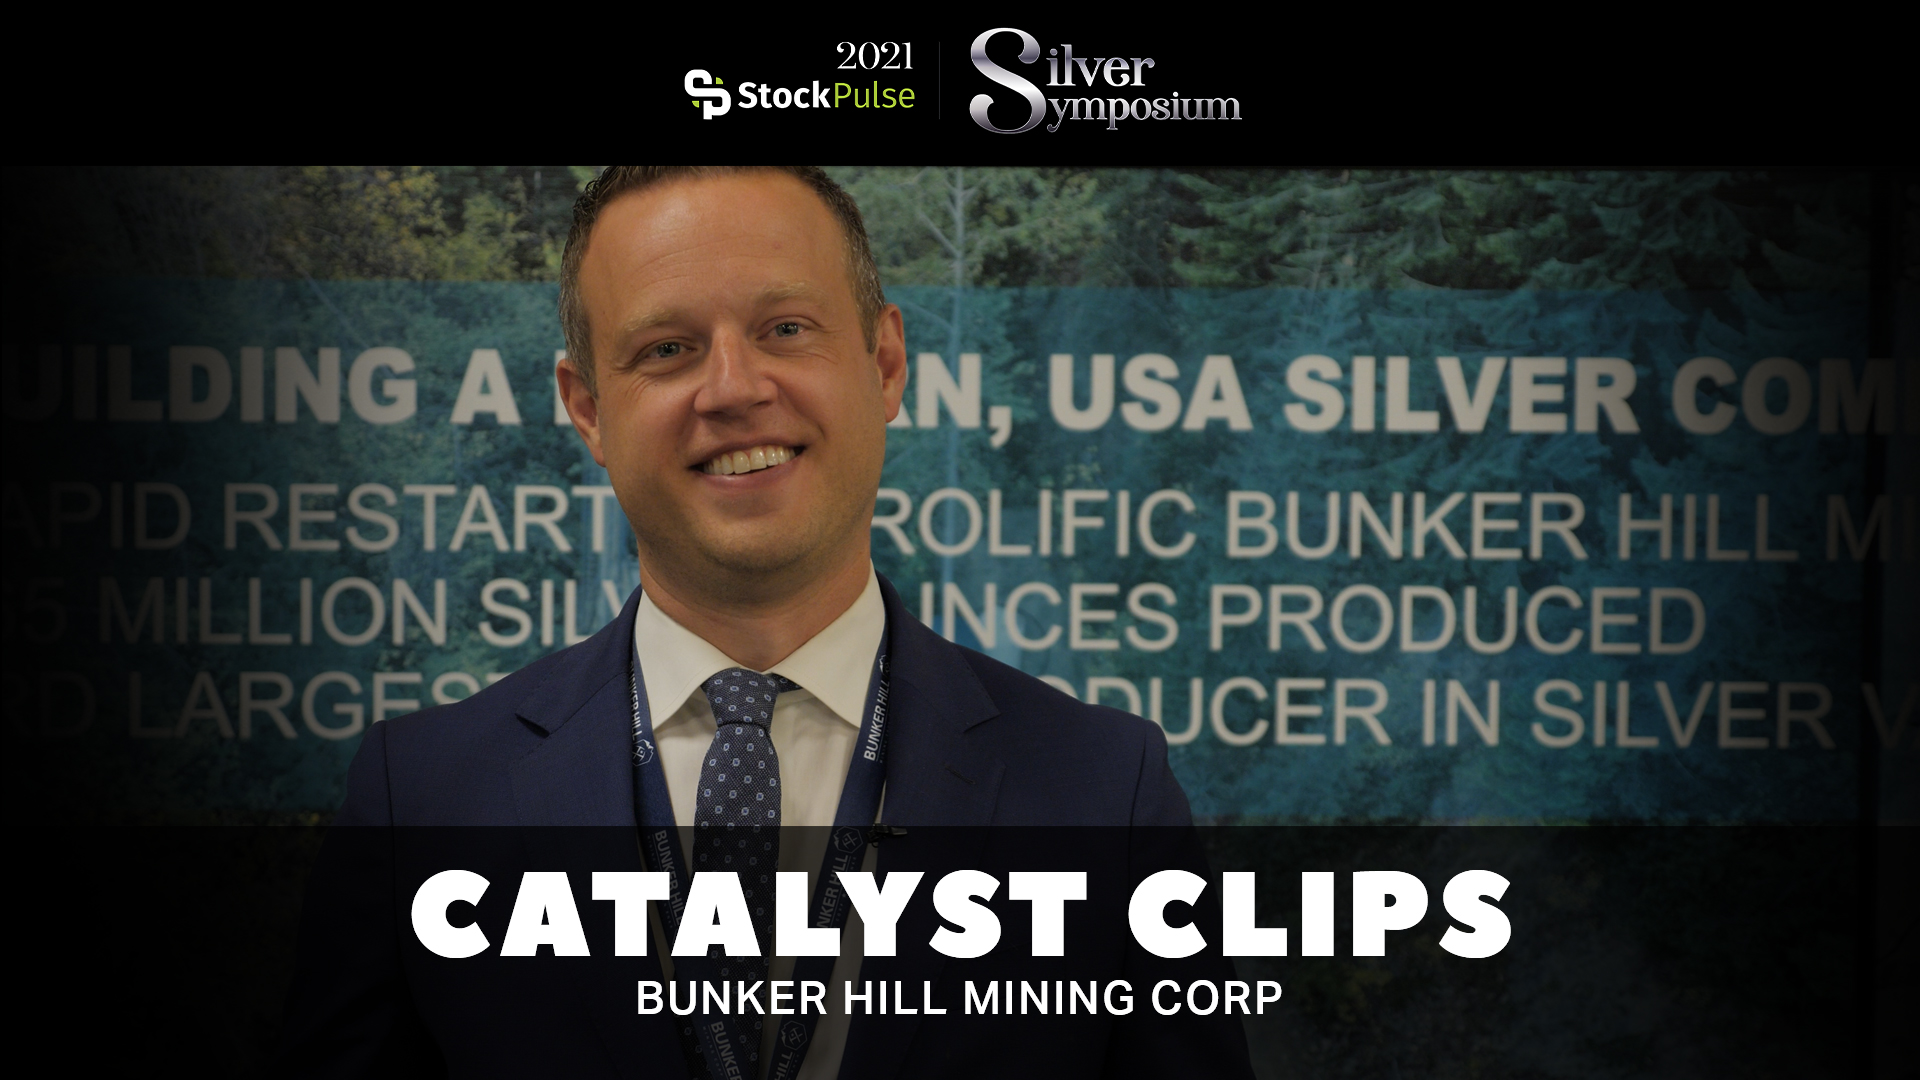 2021 StockPulse Silver Symposium Catalyst Clips | David Wiens of Bunker Hill Mining Corp